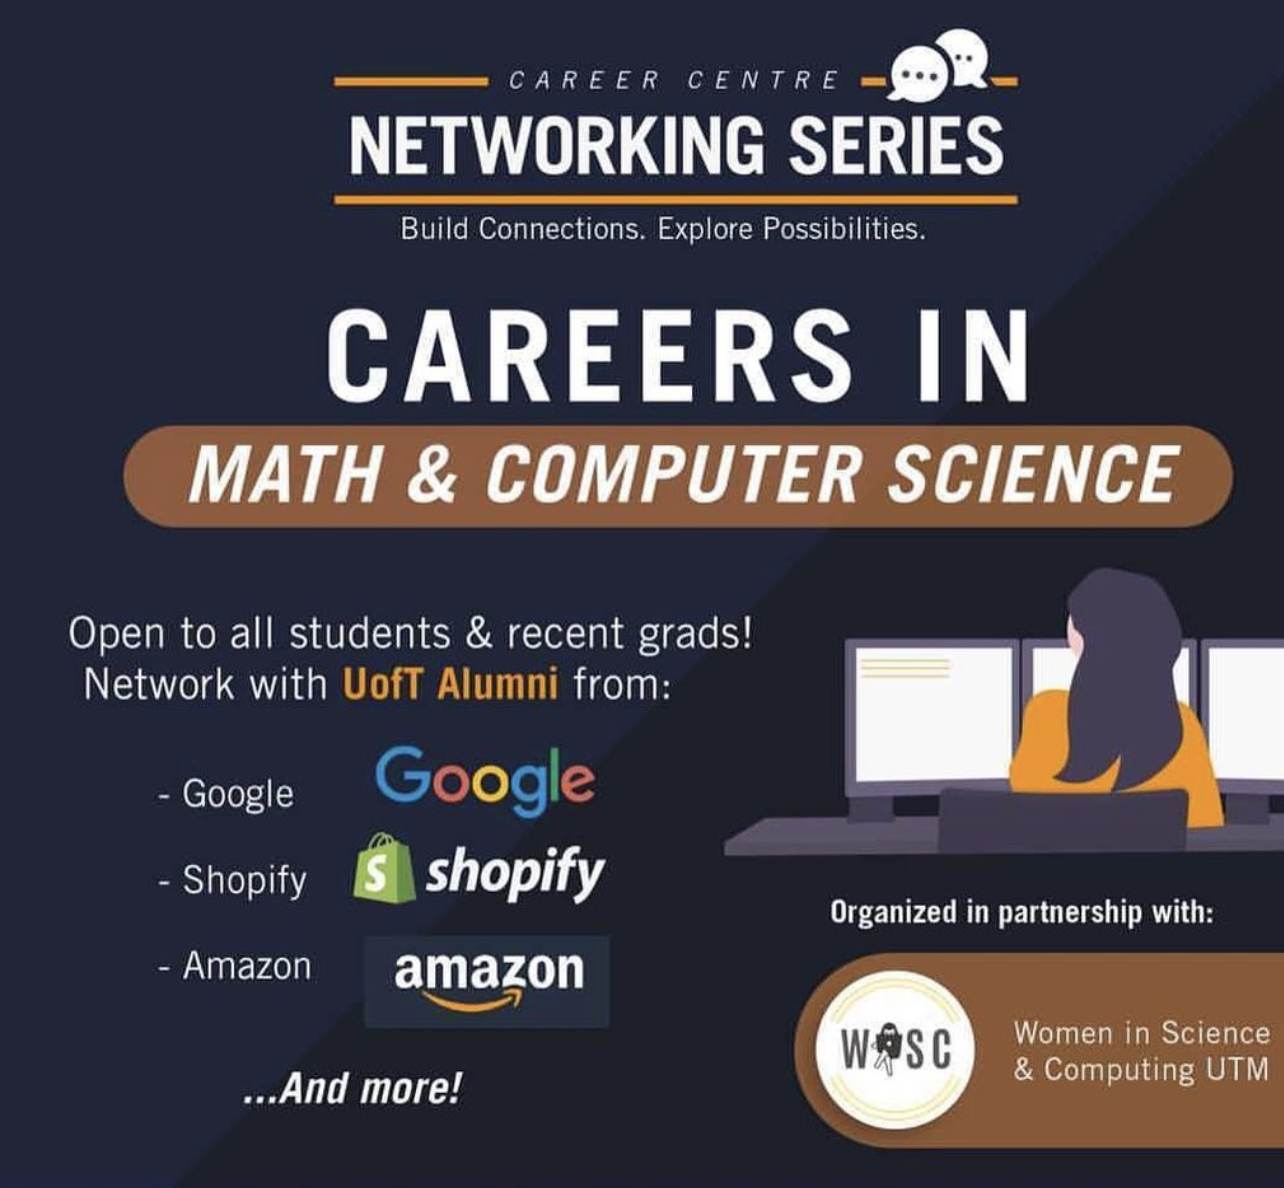 career-center-networking-series